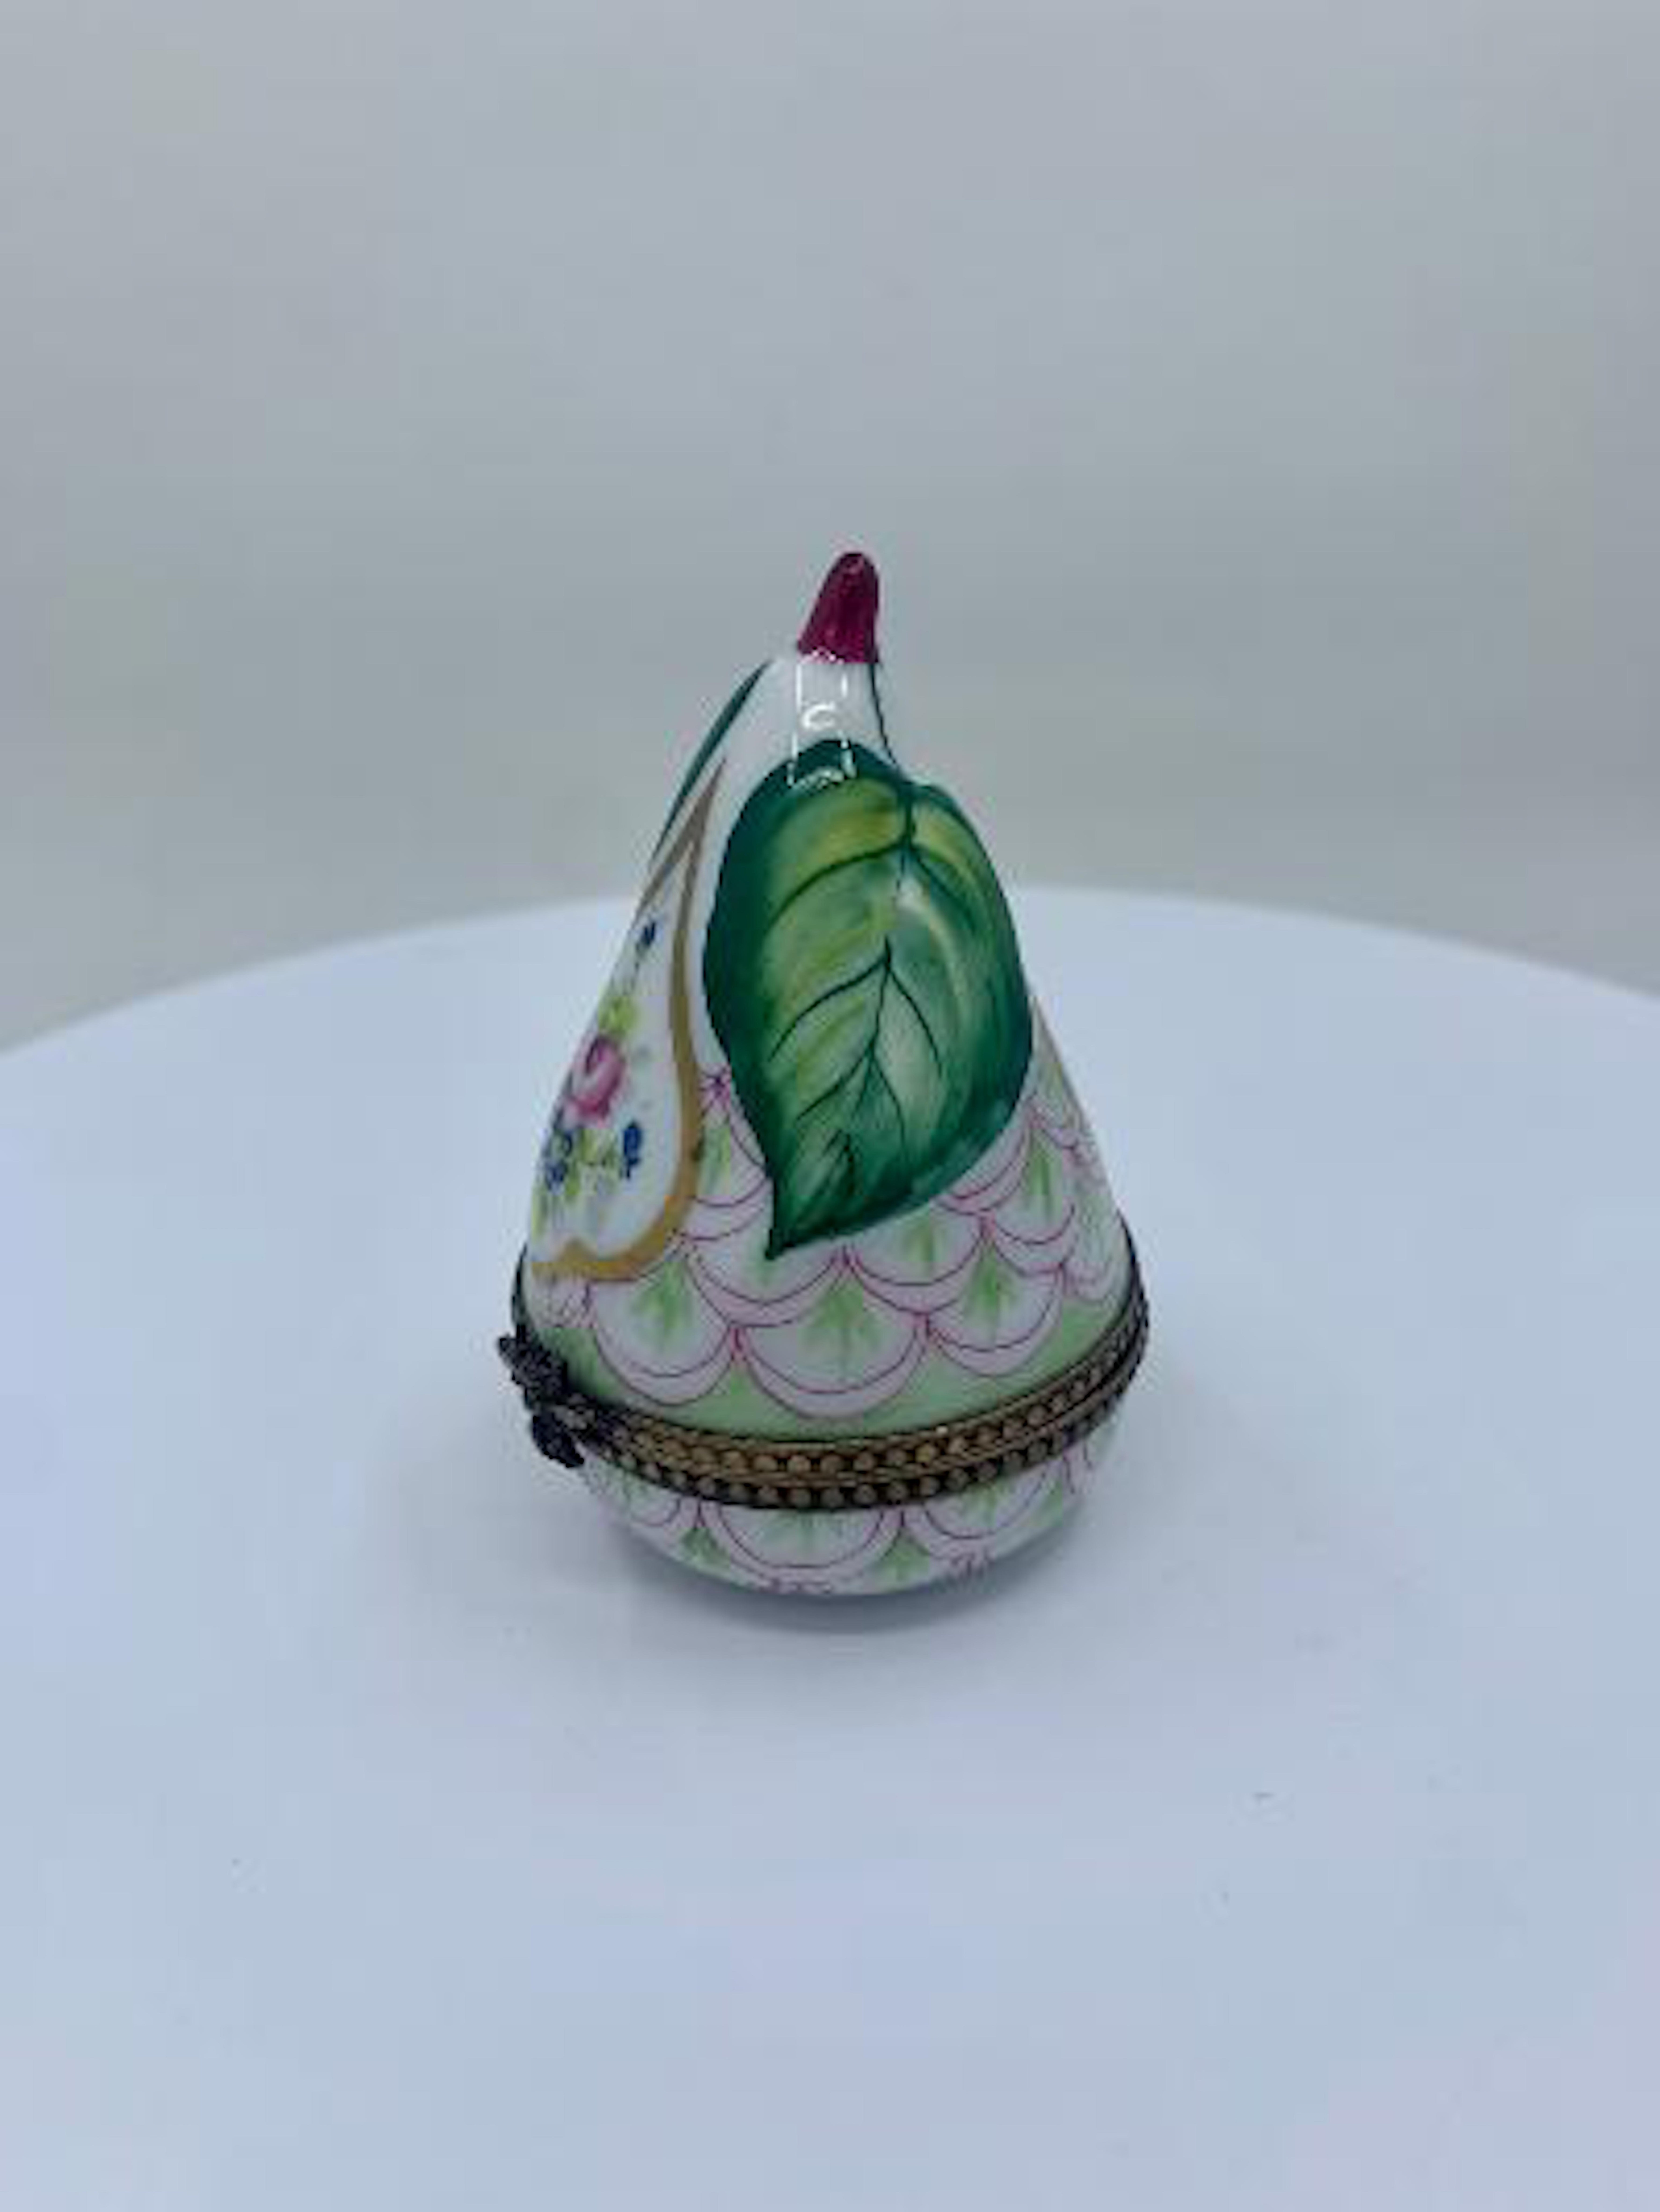 Beautiful Limoges porcelain pear shaped trinket box is handmade with a white background and is skillfully hand painted with lots of detail in pretty colors of green, pink, blue, cranberry, and is richly accented in 24-karat gold. Box features